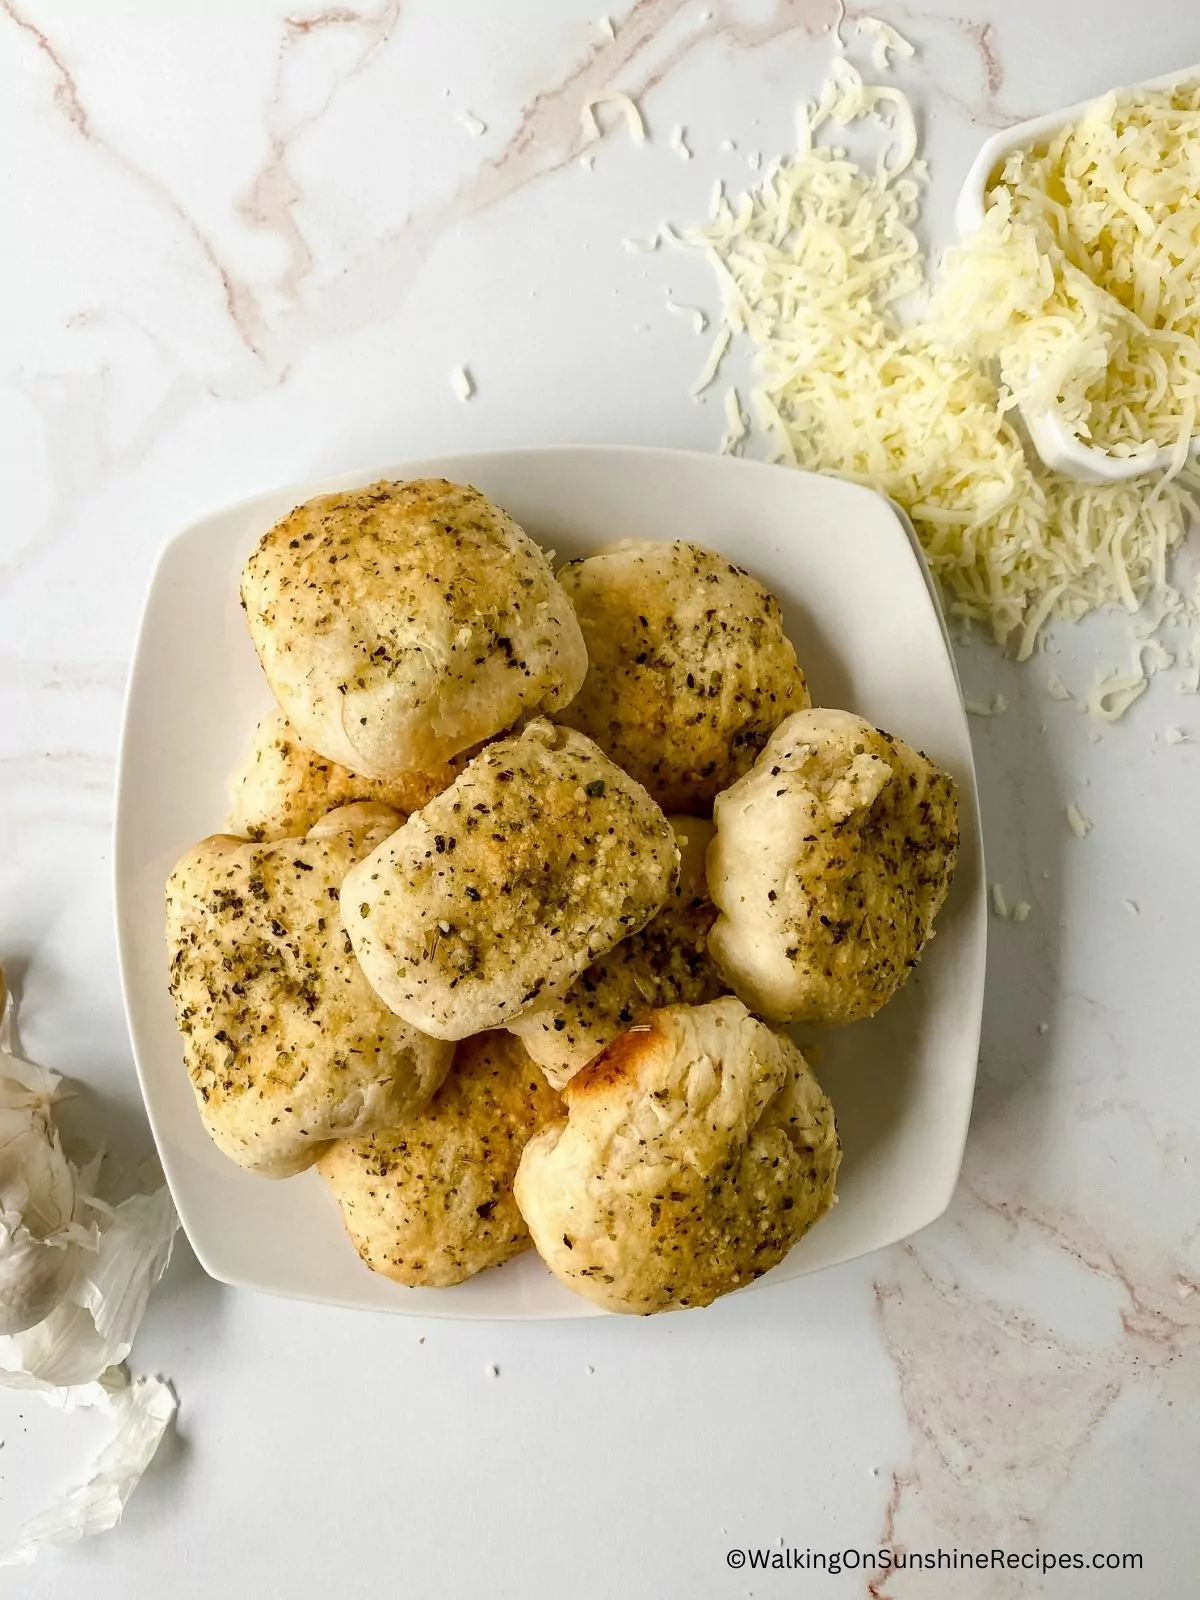 Baked biscuits on white plate with garlic bulbs and Parmesan cheese.